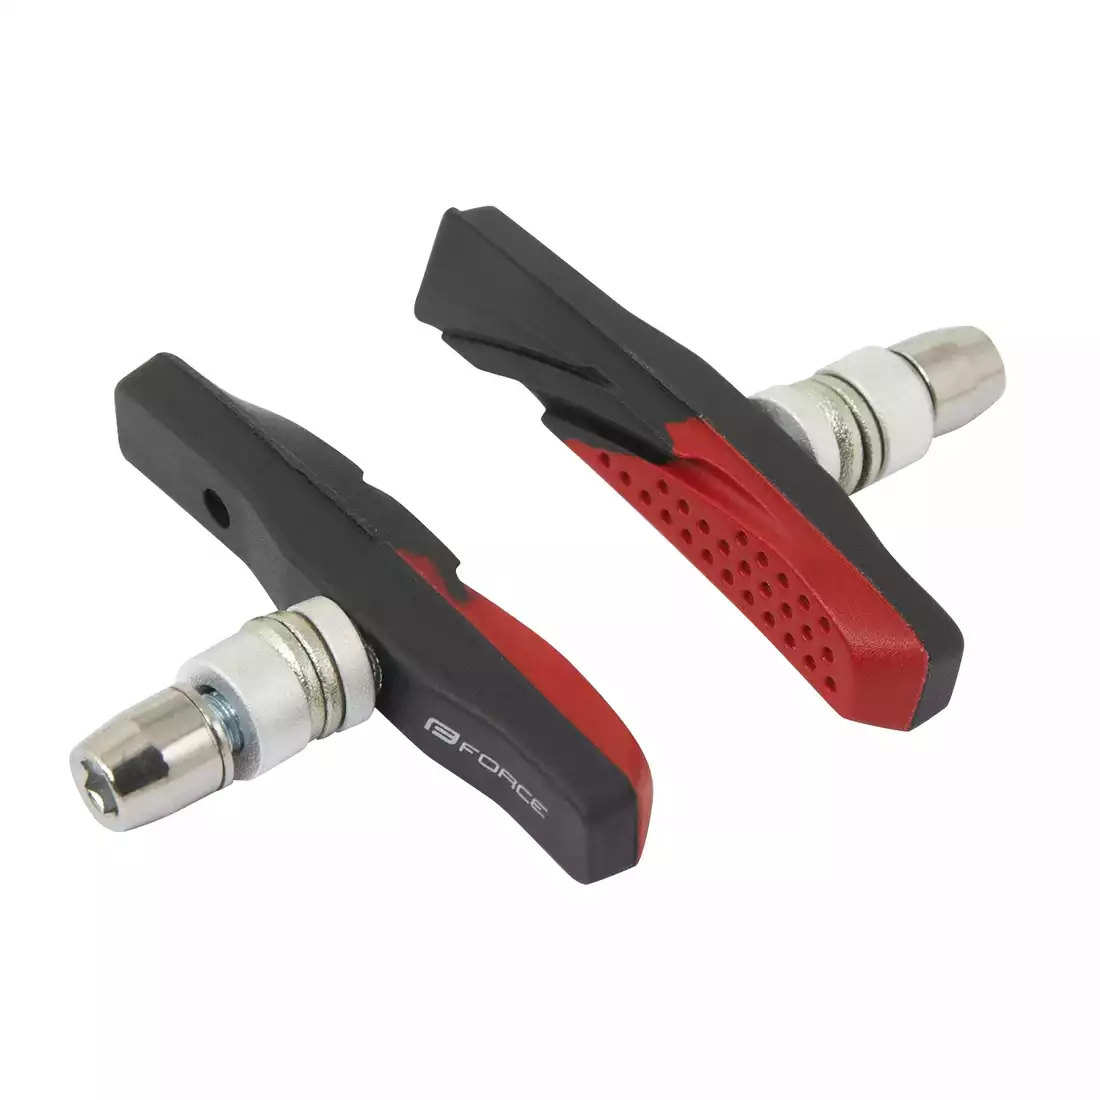 FORCE brake pads ONE-OFF for type brakes V-brake black and red